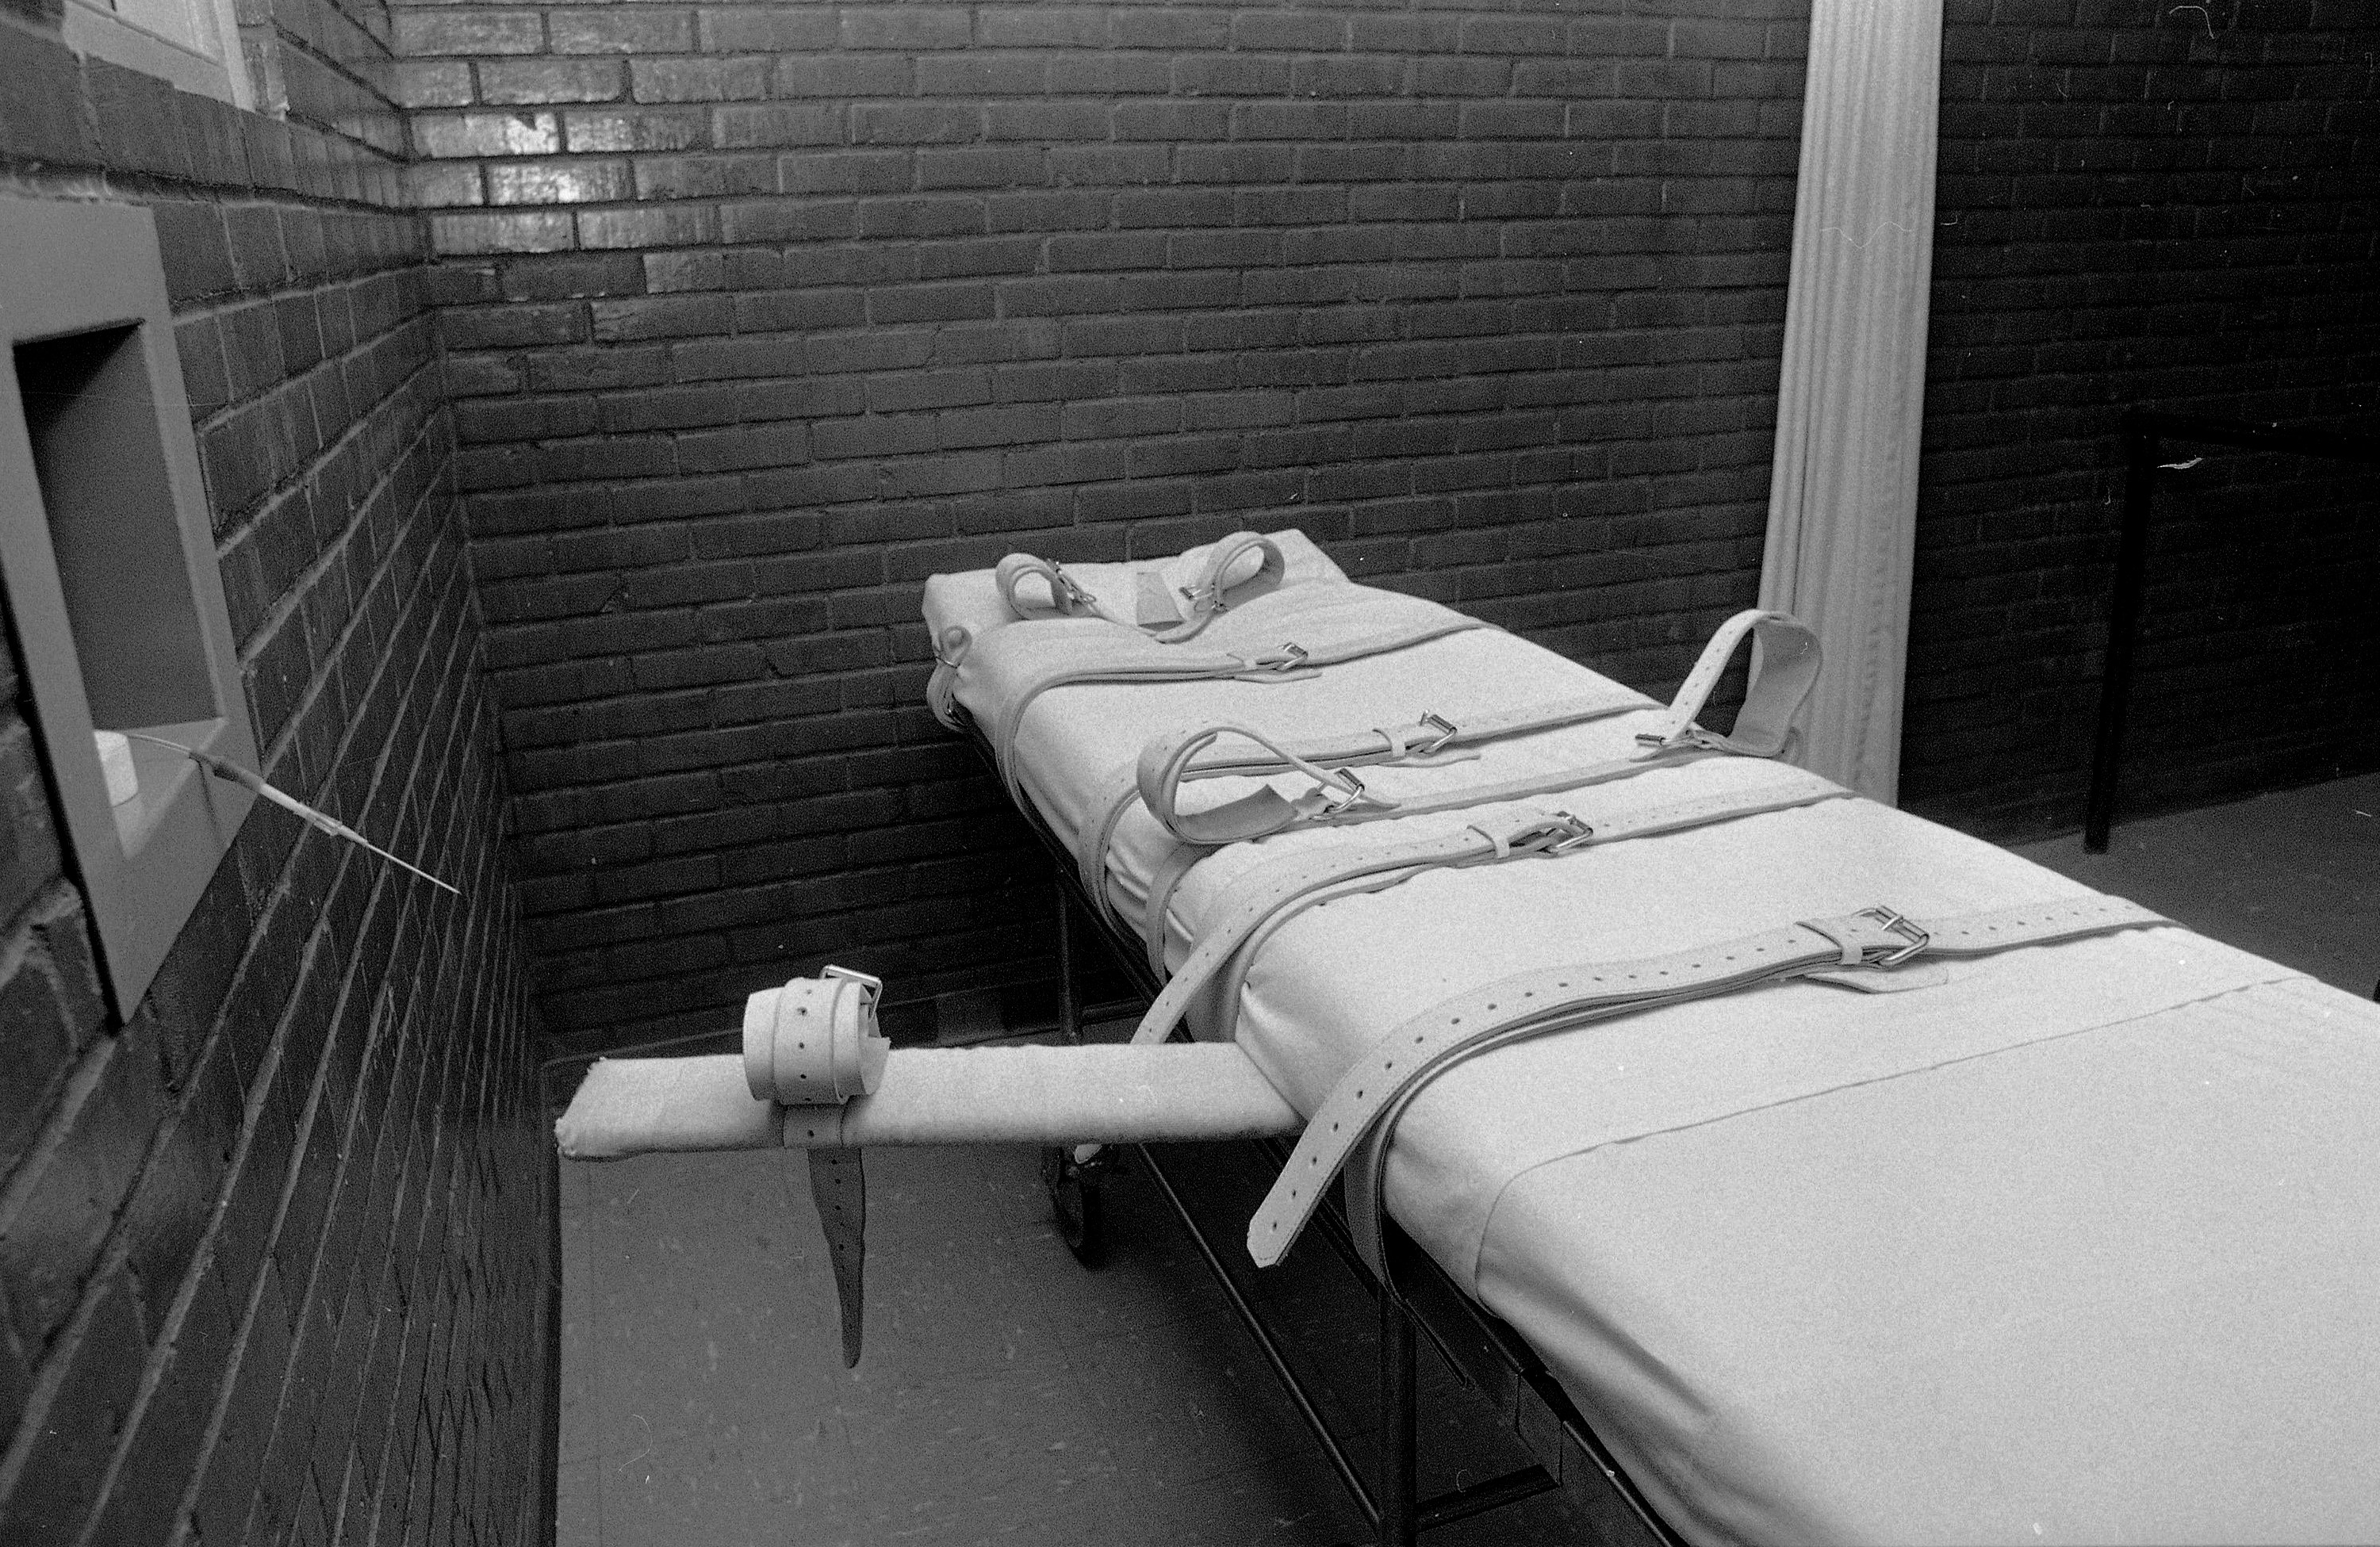 A hospital-type gurney is used for execution by lethal injection at the Texas Department of Corrections in Huntsville, Tex., Dec. 6, 1982.  Restraints rest on top of the gurney and an intravenous needle is visible at the observation window at left.  (AP Photo/Ed Kolenovsky)